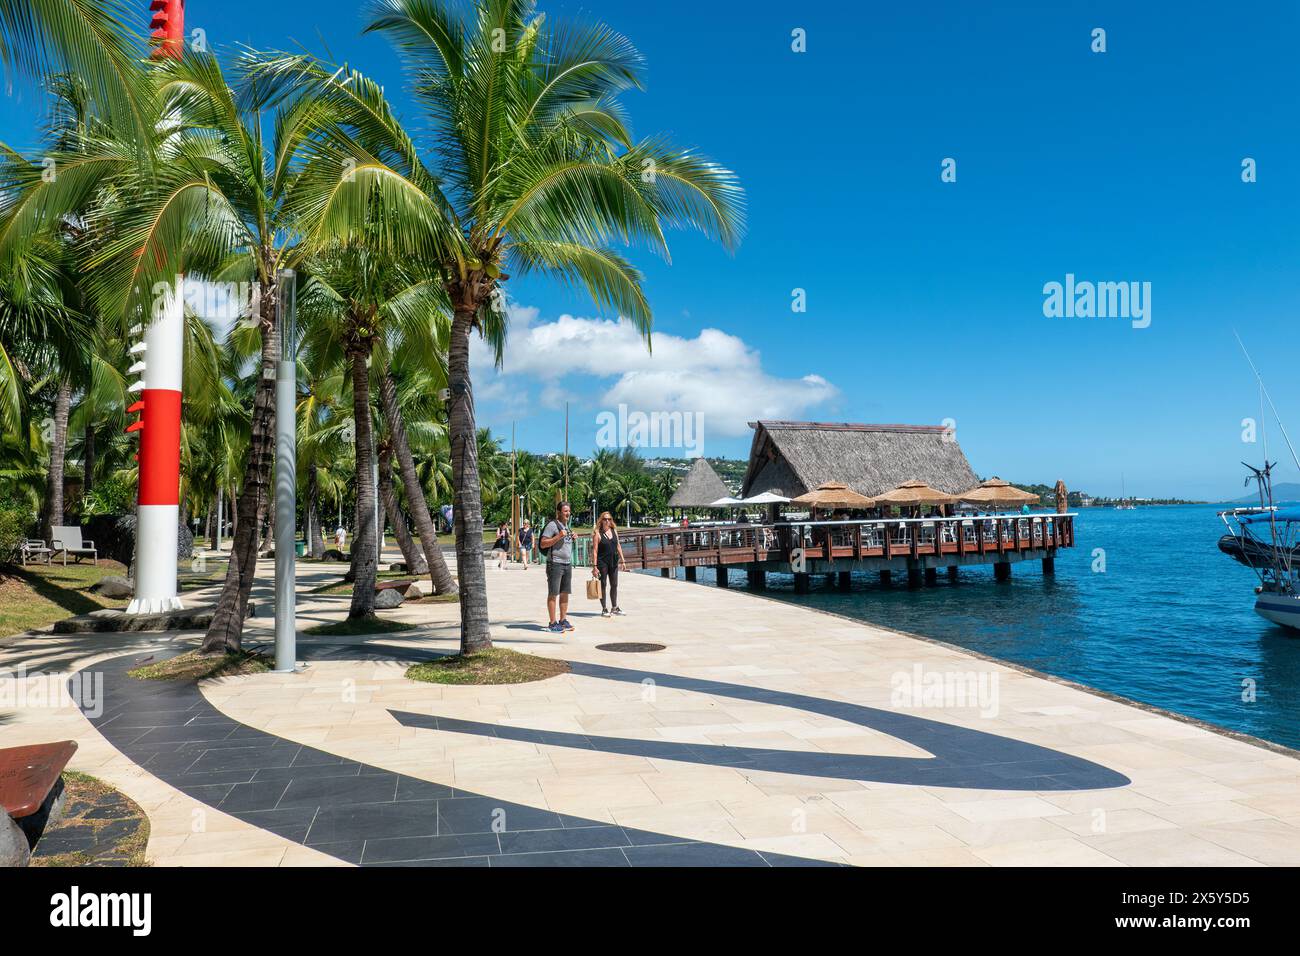 Tourists strolling on the waterfront at Papeete, Island of Tahiti, French Polynesia Stock Photo